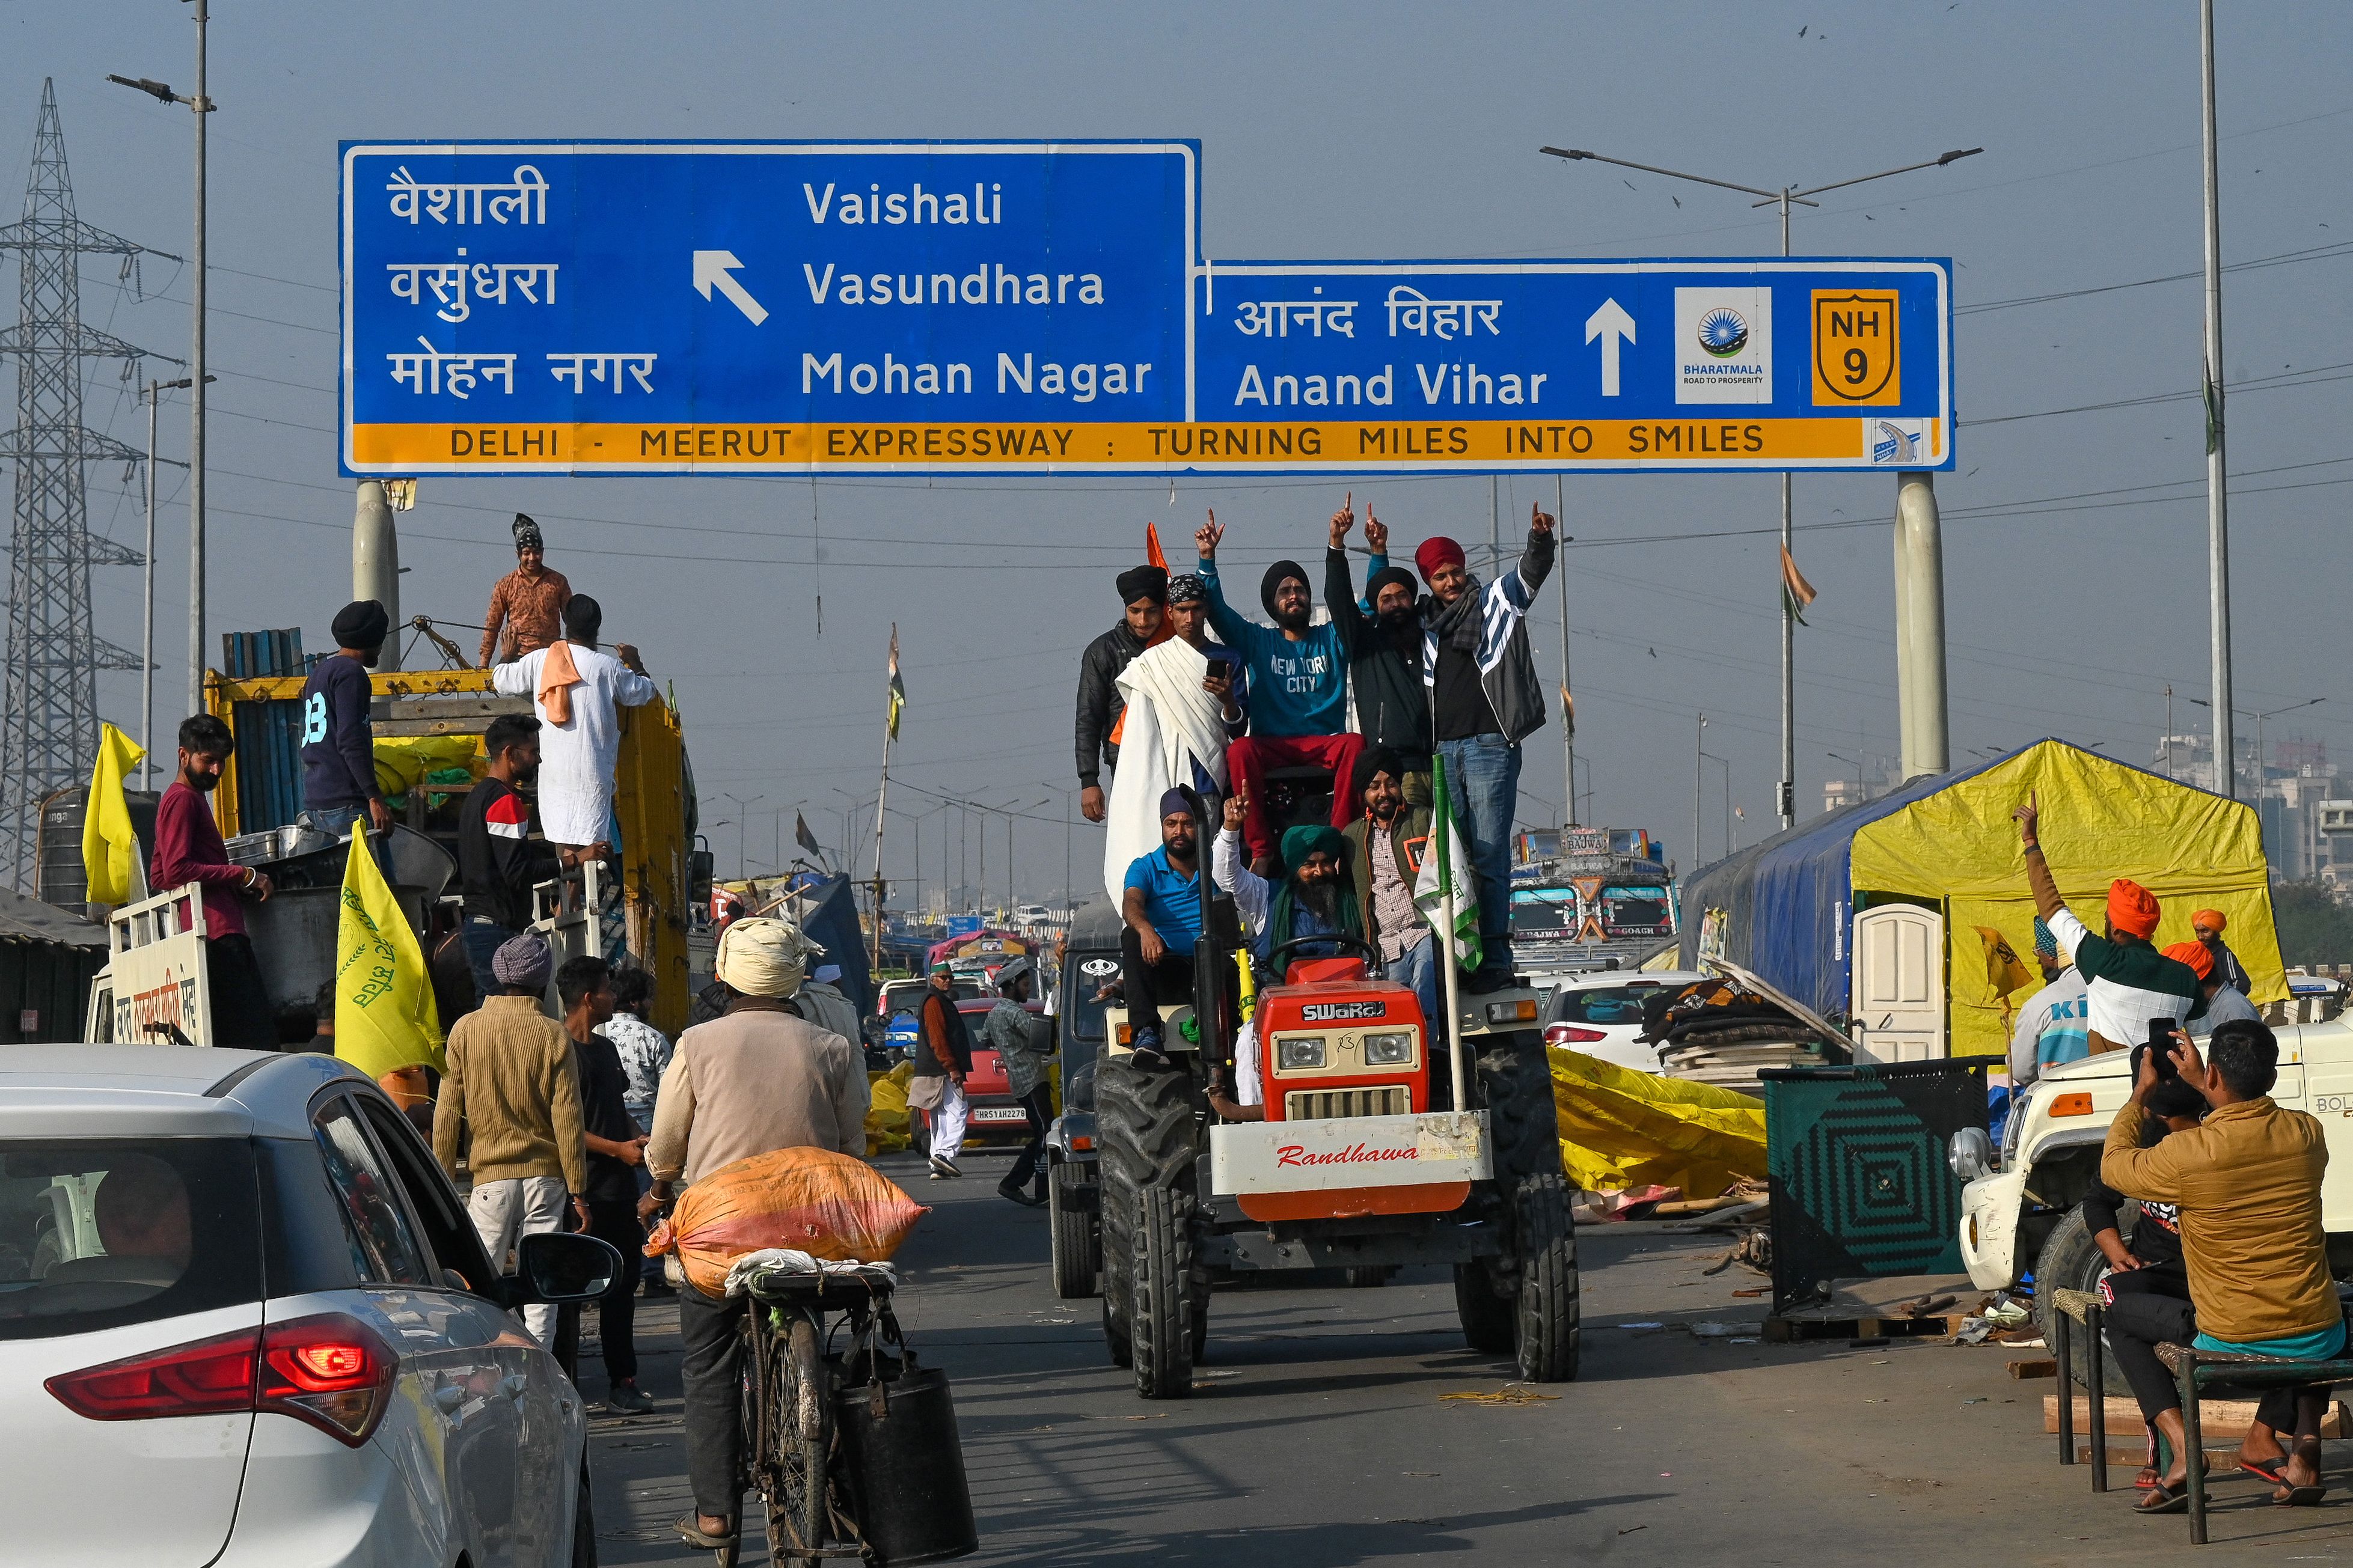 Farmers ride on a tractor as they leave the protest site at the Delhi-Uttar Pradesh state border in Ghazipur on 11 December 2021